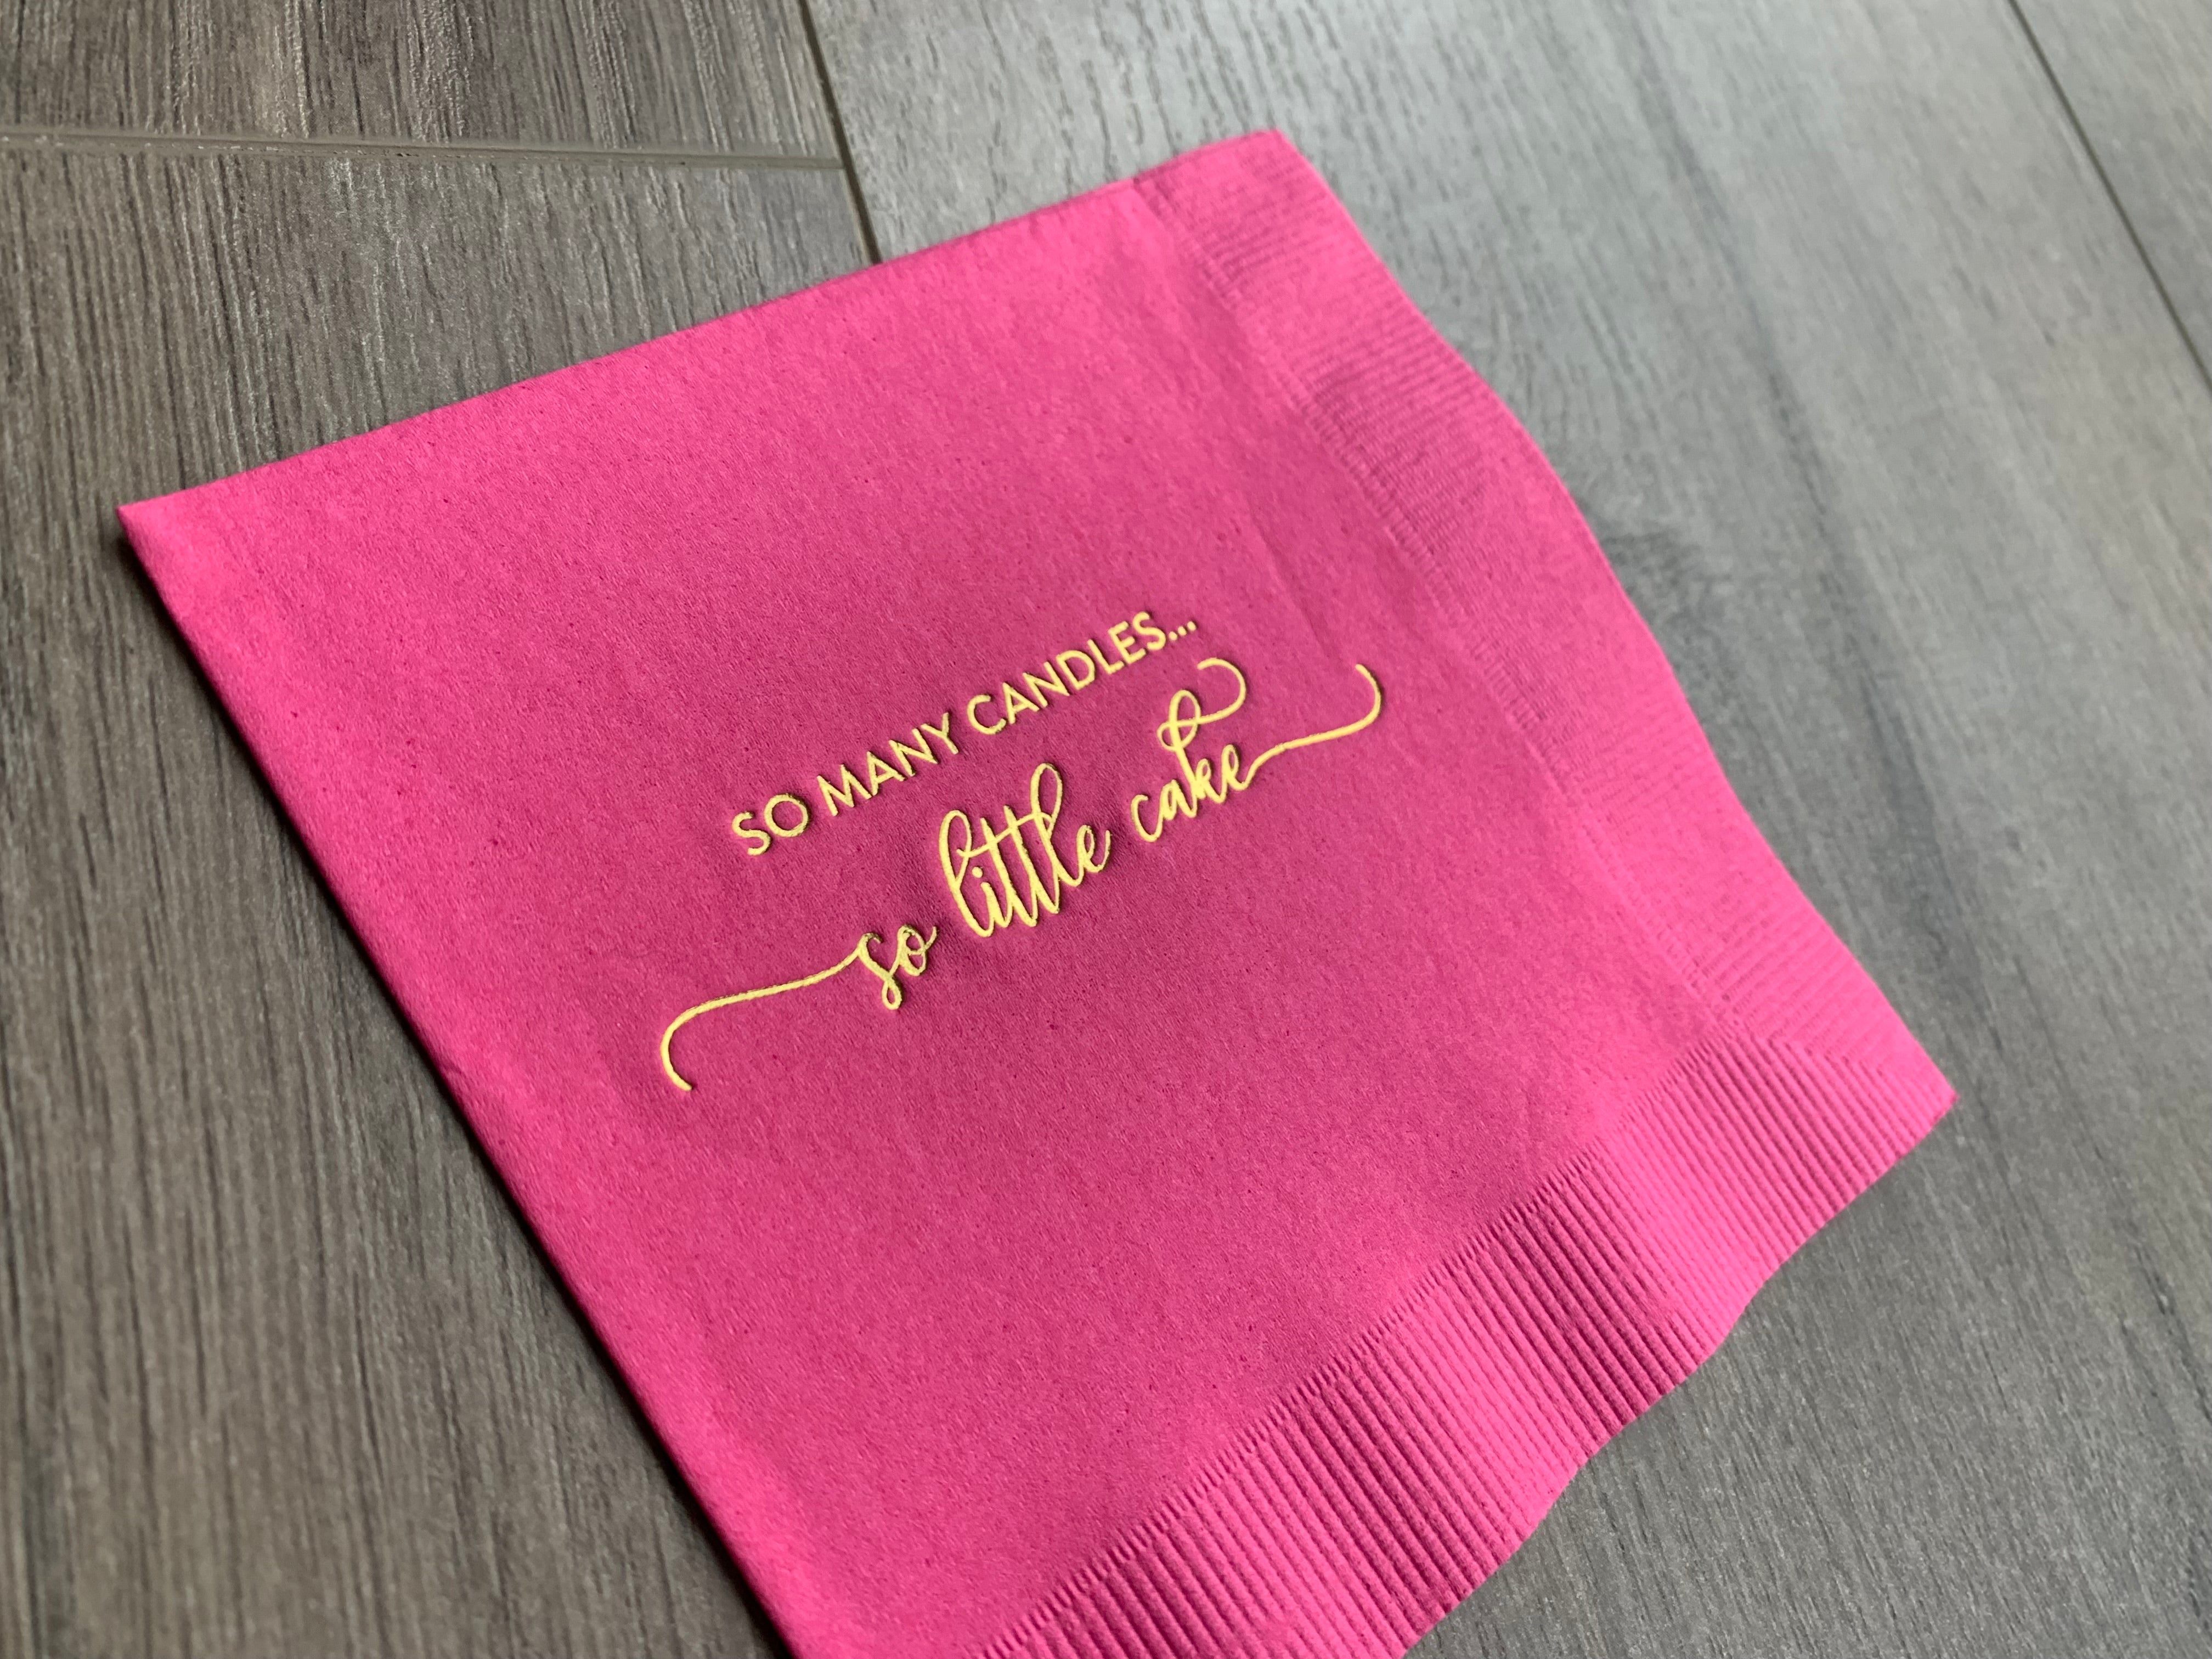 closeup image of the metallic gold foil printing that reads "so many candles... so little cake" on a bright hot pink cocktail napkin by Stationare